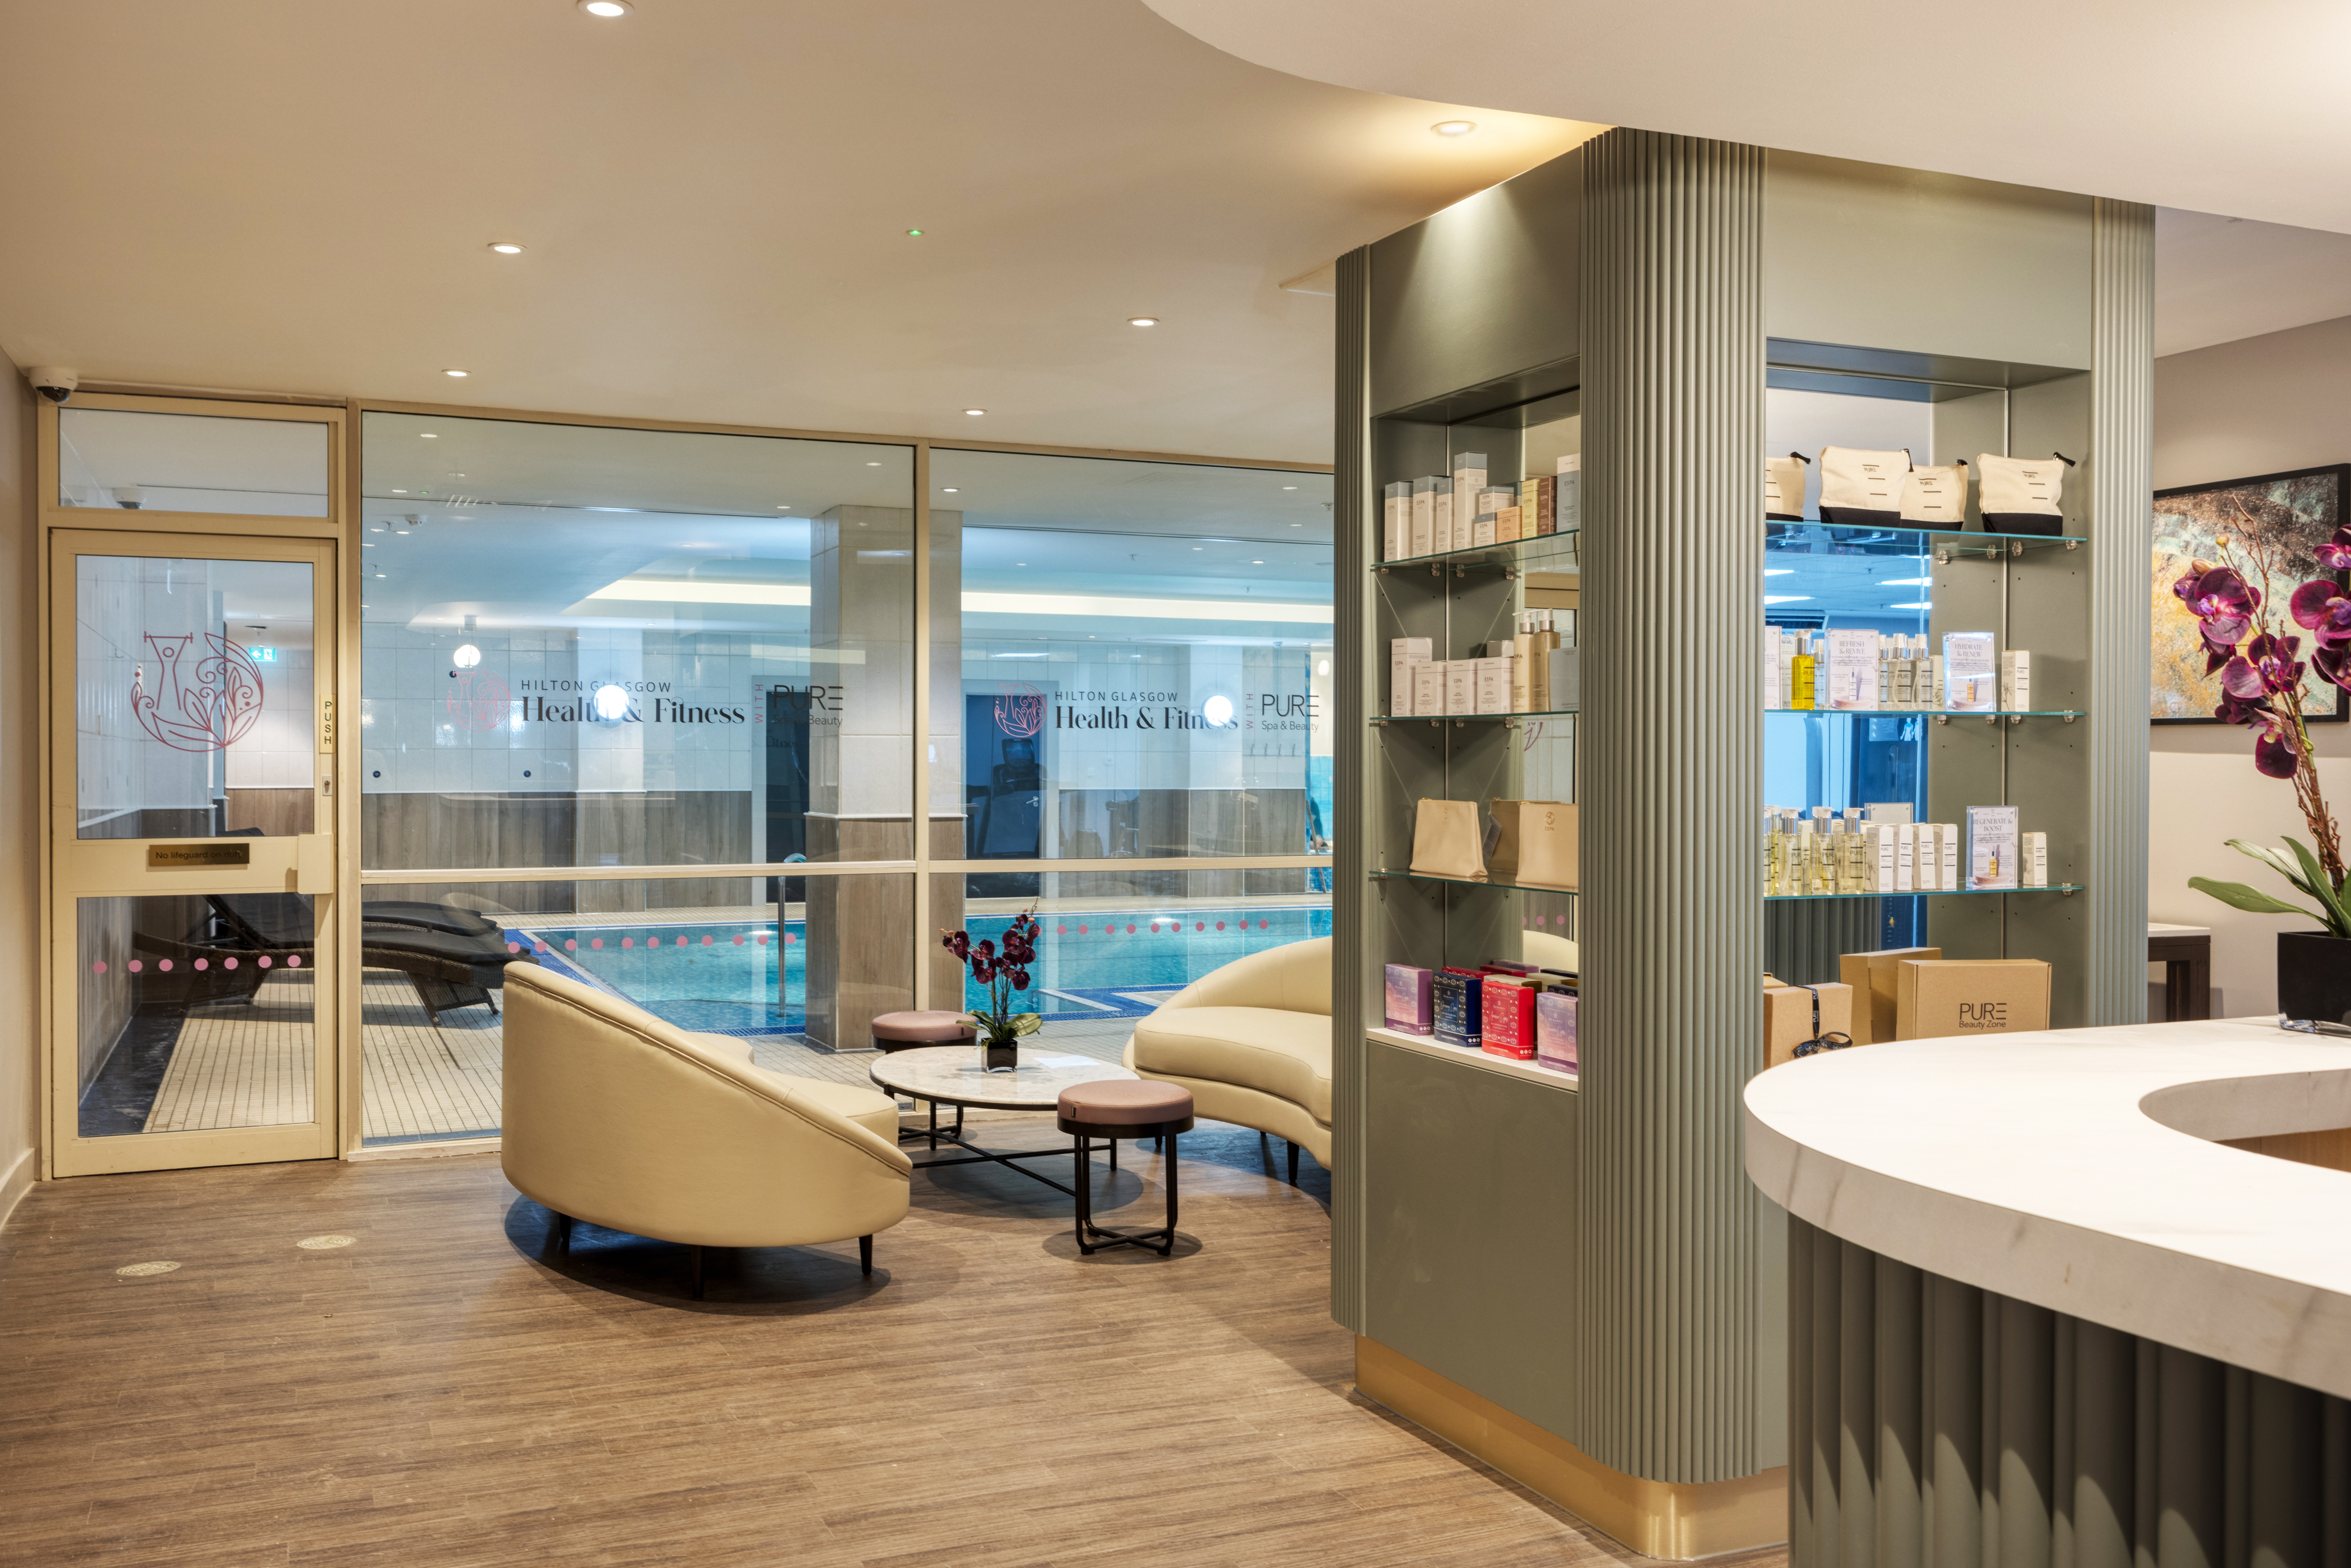 Mother To Be Indulgent Treatments, PURE Spa And Beauty Hilton William